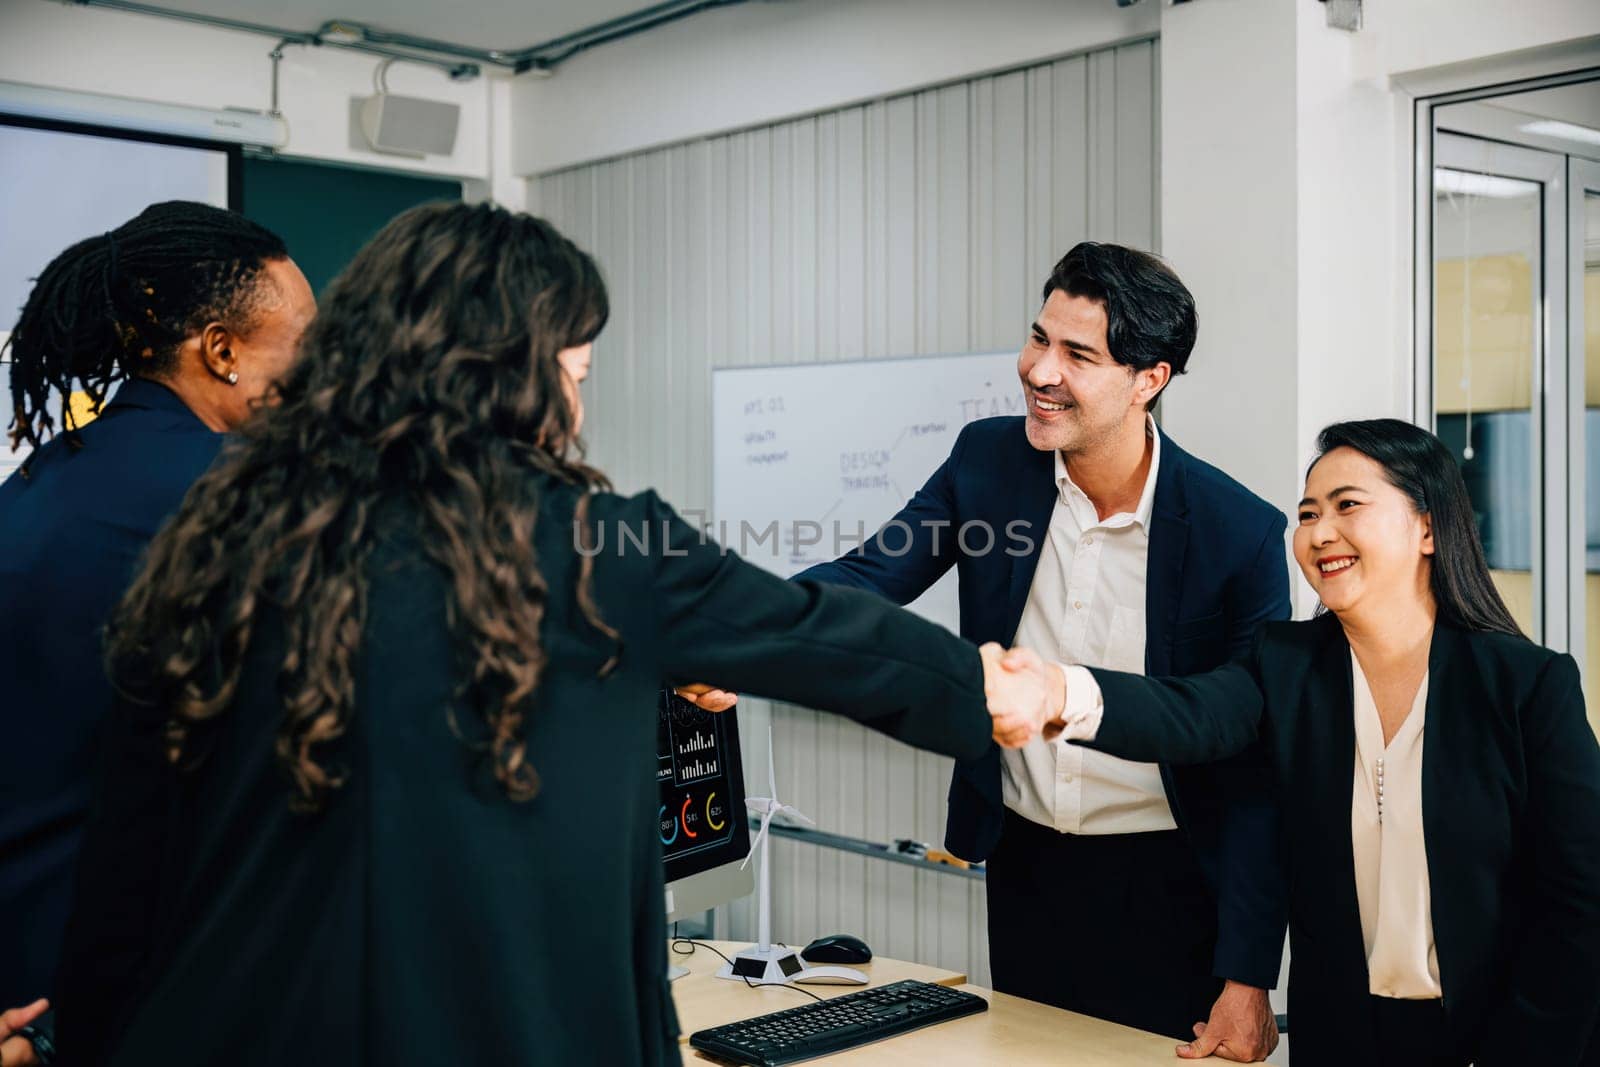 In a meeting, business people shake hands in an office, signifying their successful partnership. Colleagues, including managers, lawyers, and executives, celebrate their achievement. Teamwork by Sorapop